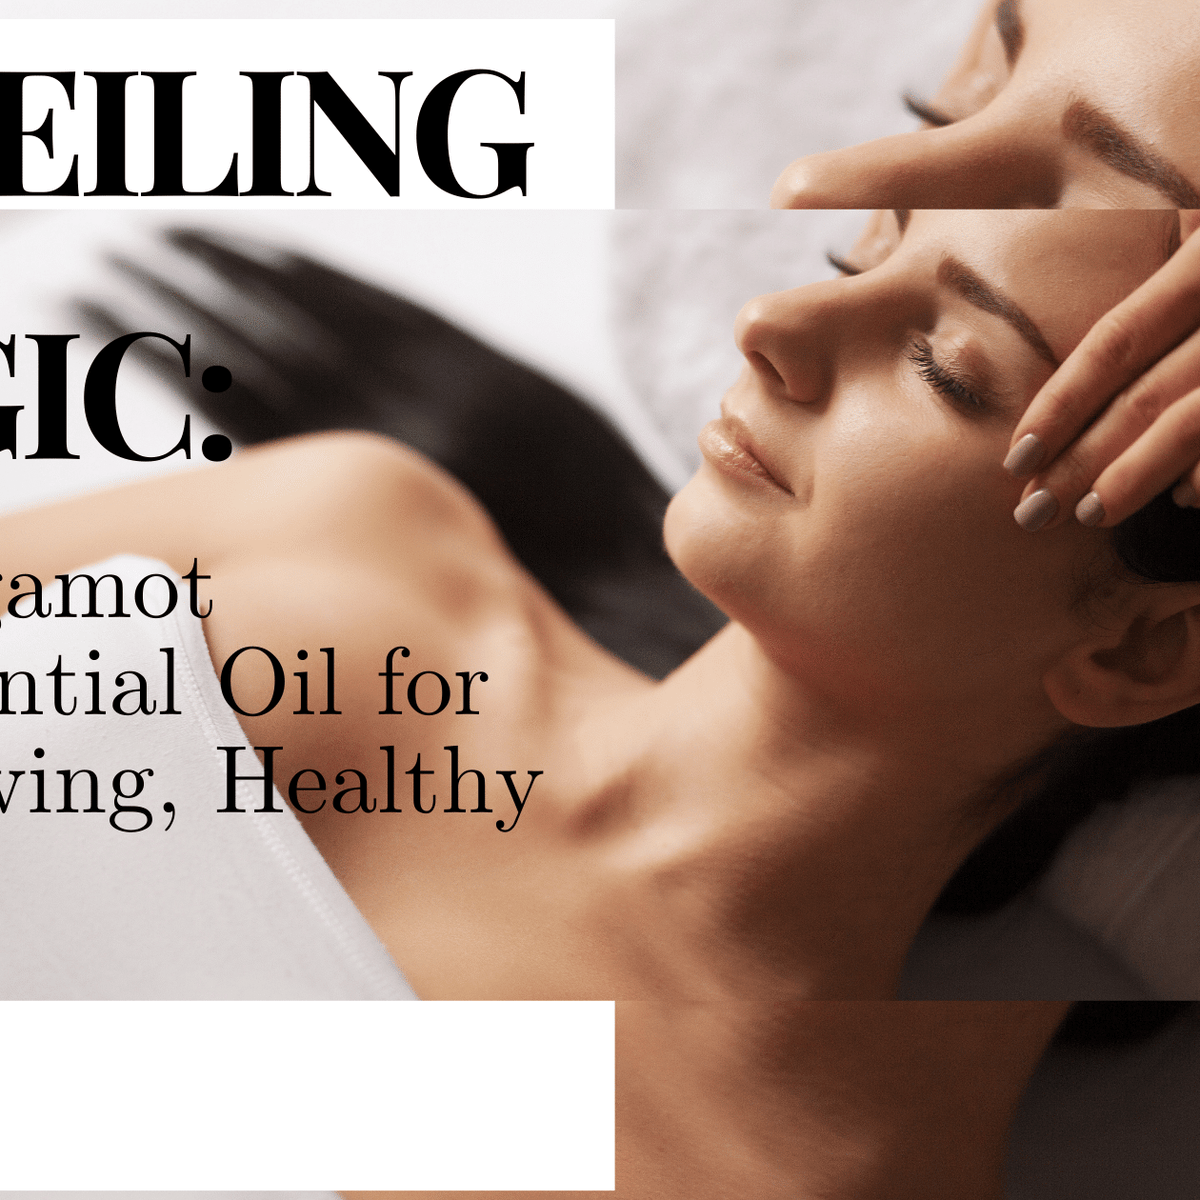 10 aromatherapy oils for common skin conditions